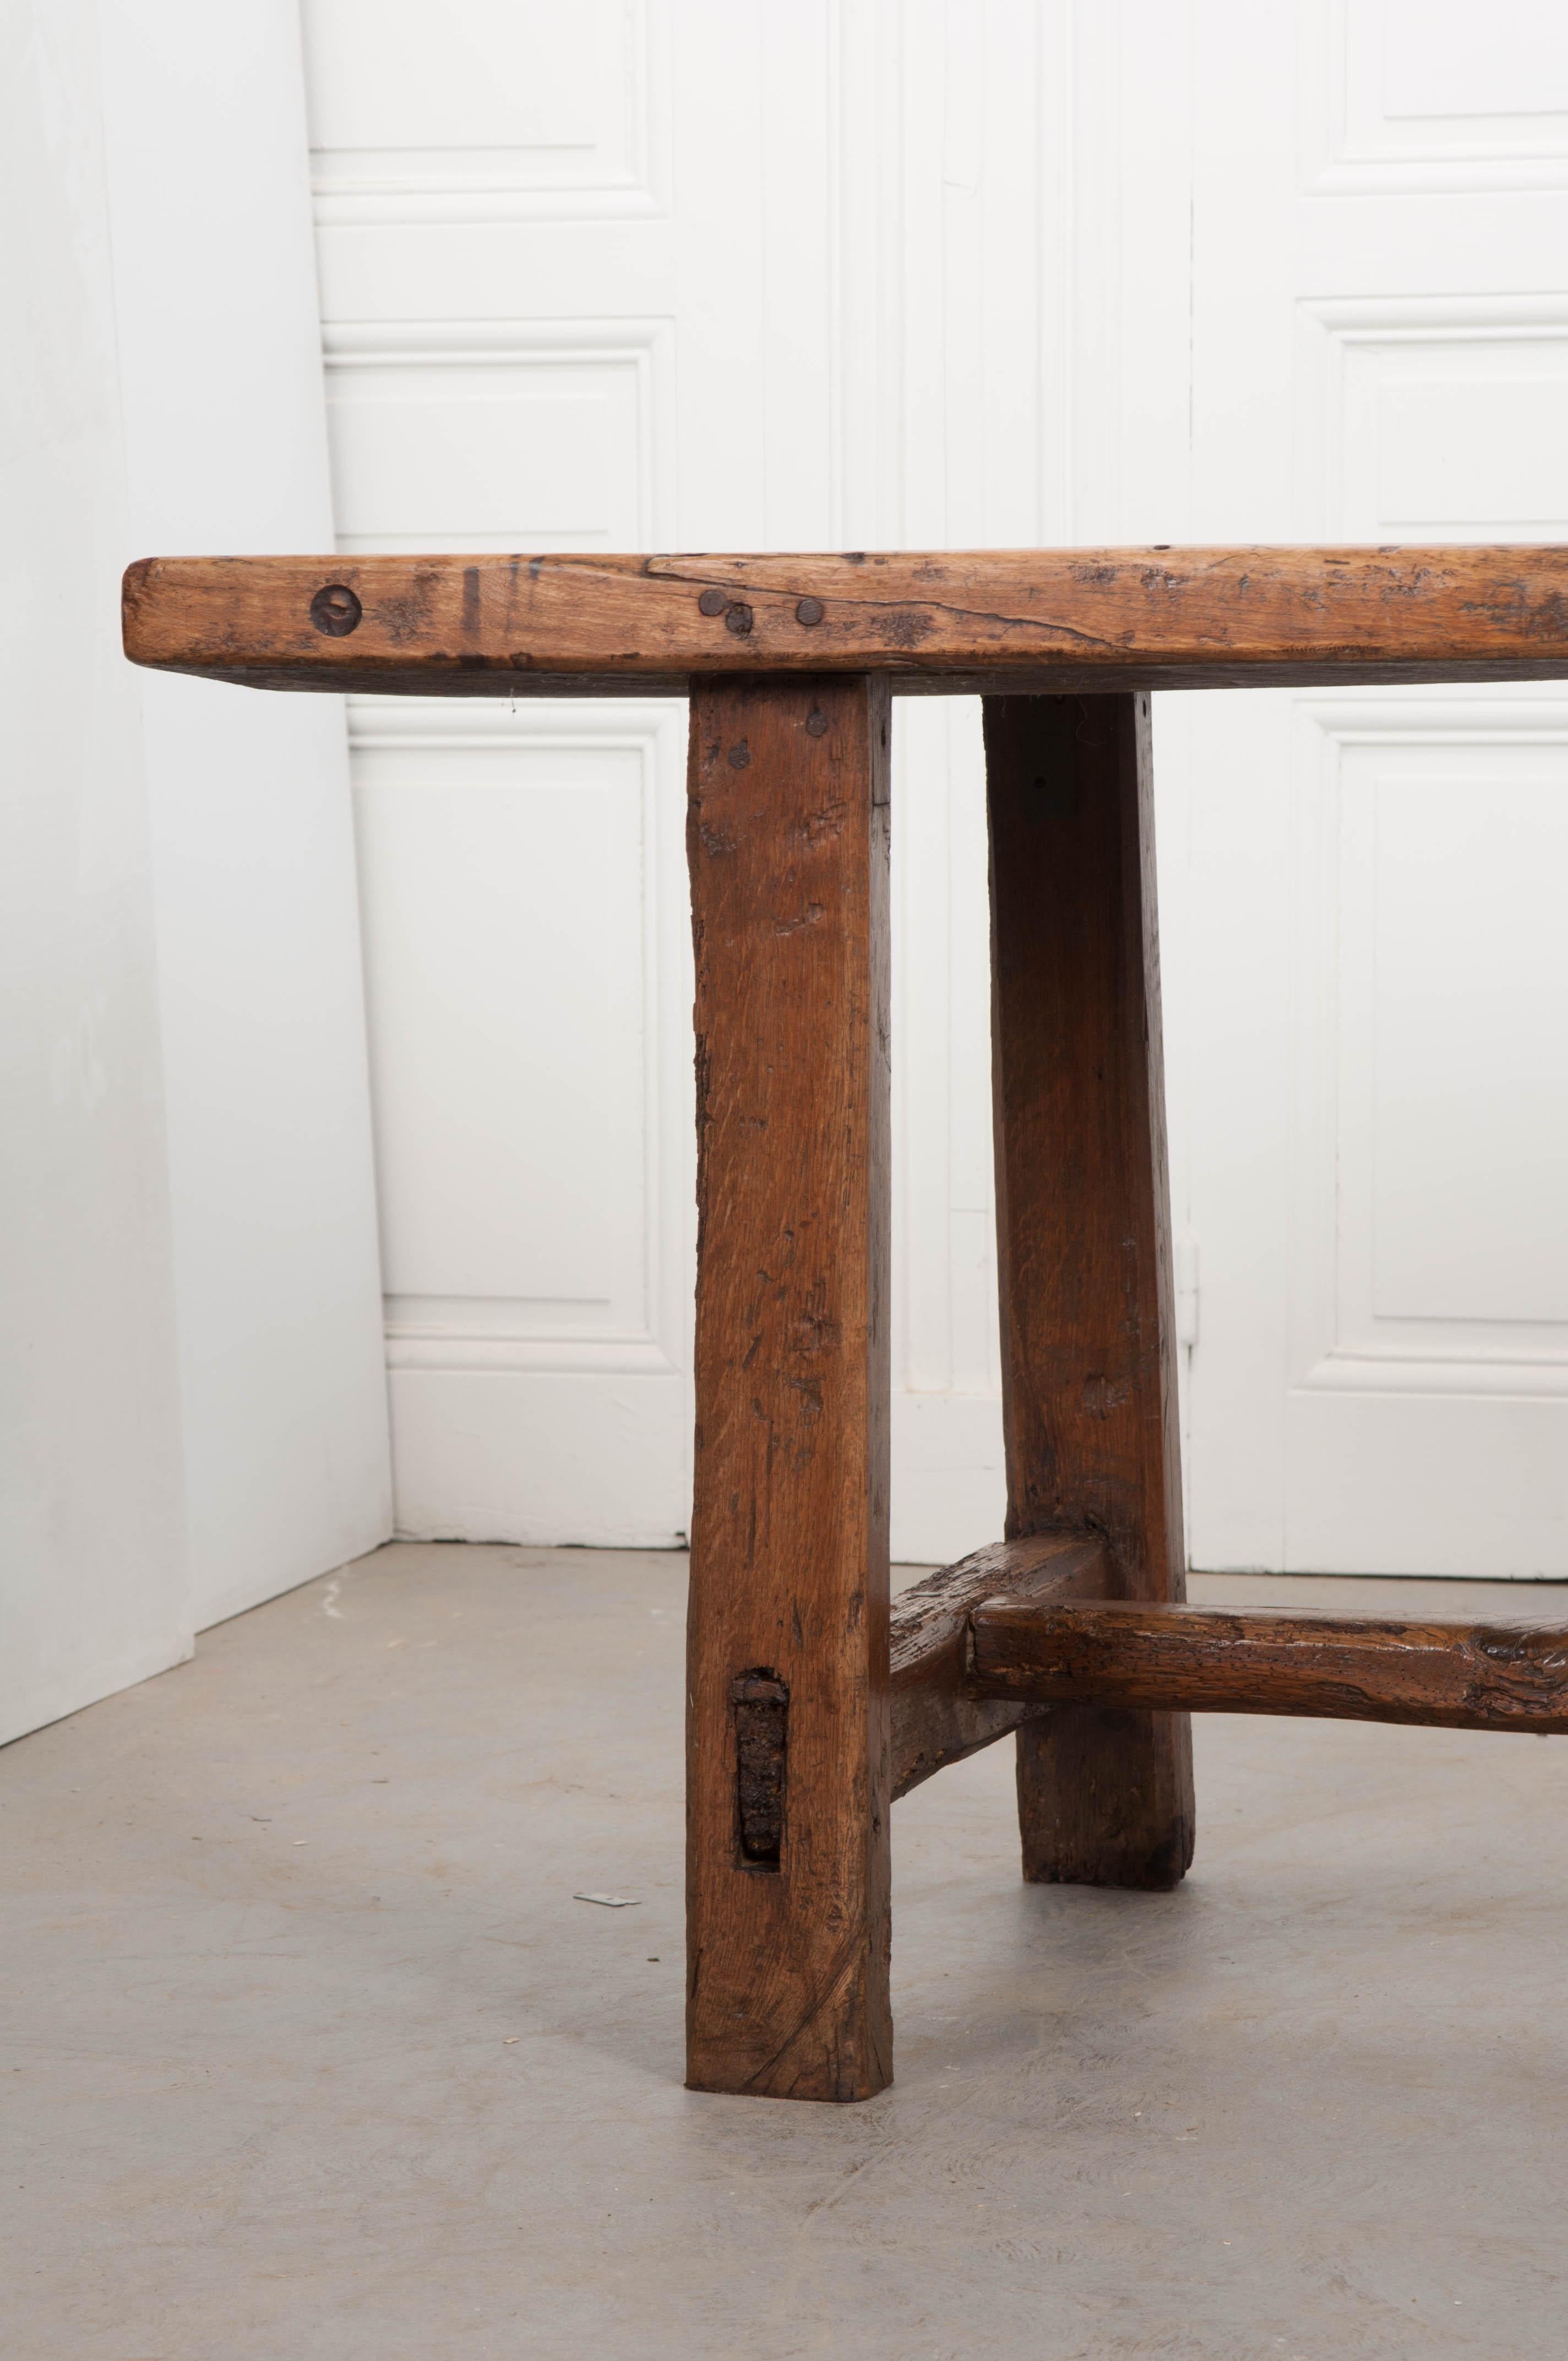 This stunning and incredibly well-made French farmhouse table, circa 1860s, was created out of oak and walnut using Classic dowel joints and mortise and tenon. The hefty two-inch plank top boasts a gorgeous, rich patina and is made of an oak panel